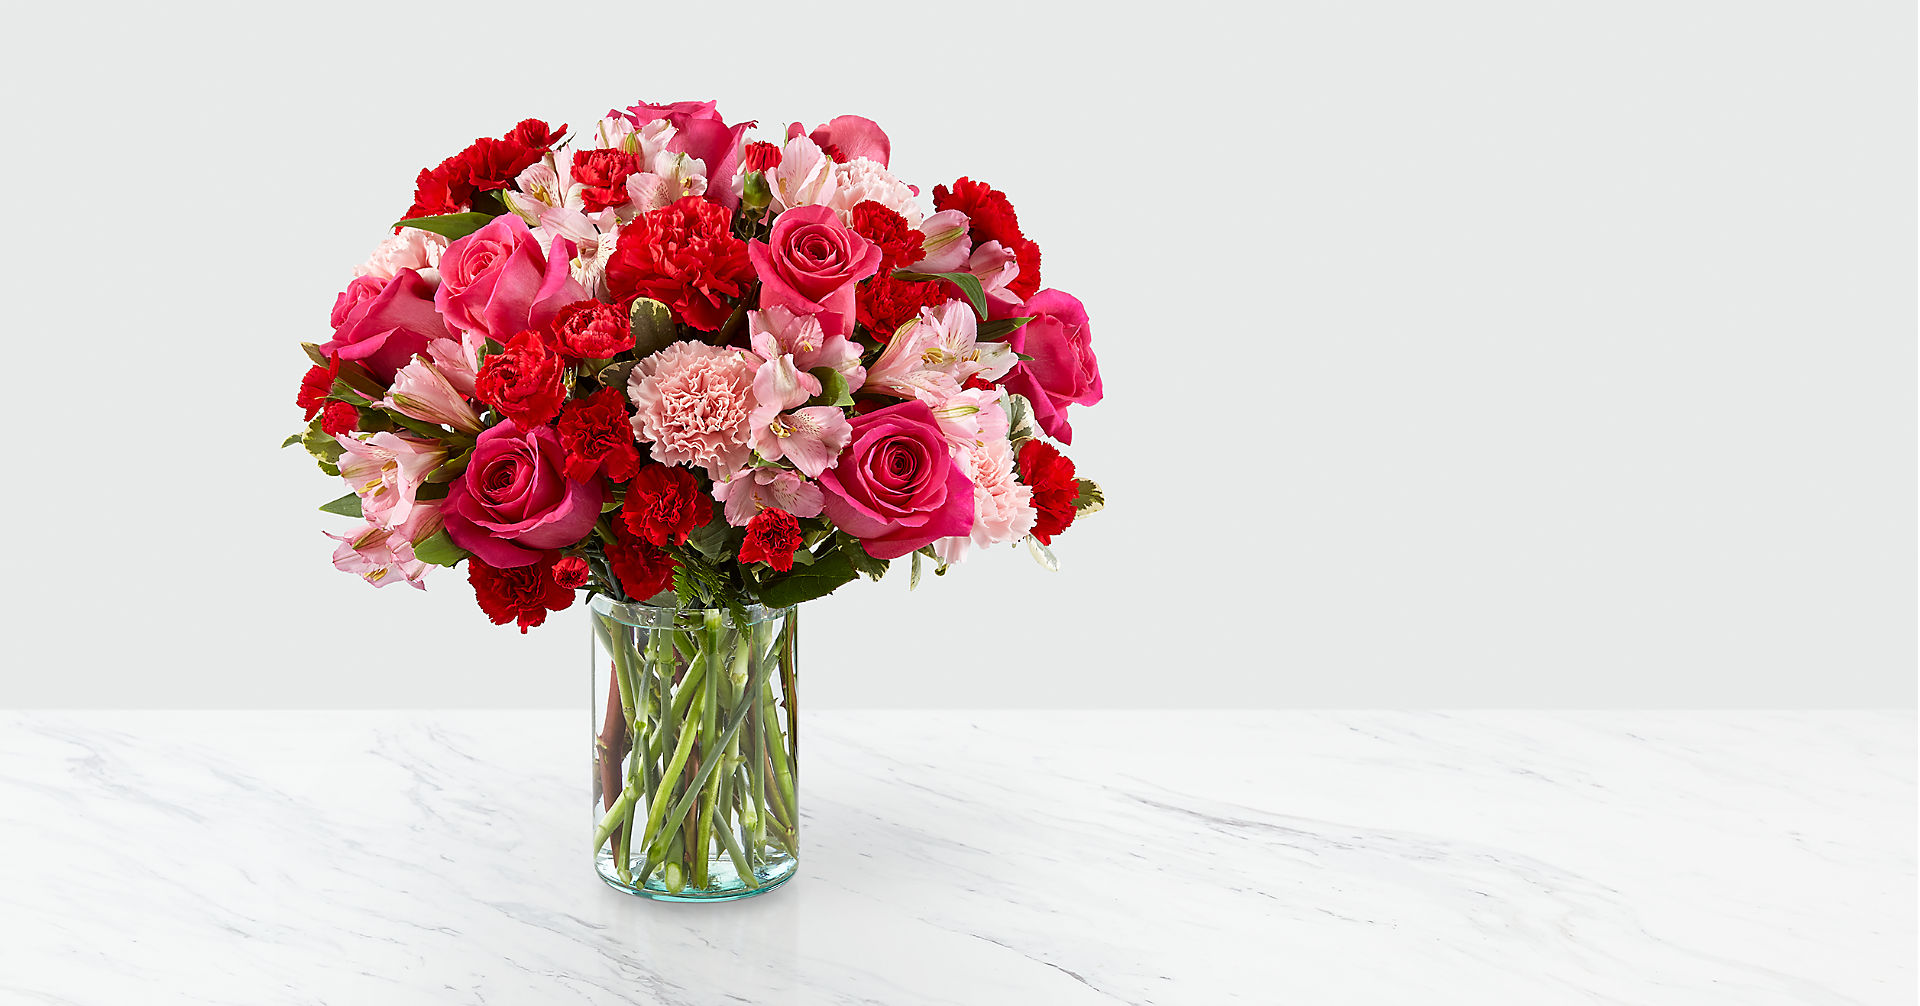 The FTD You're Precious Bouquet - Glendale florist by elite flowers and gifts